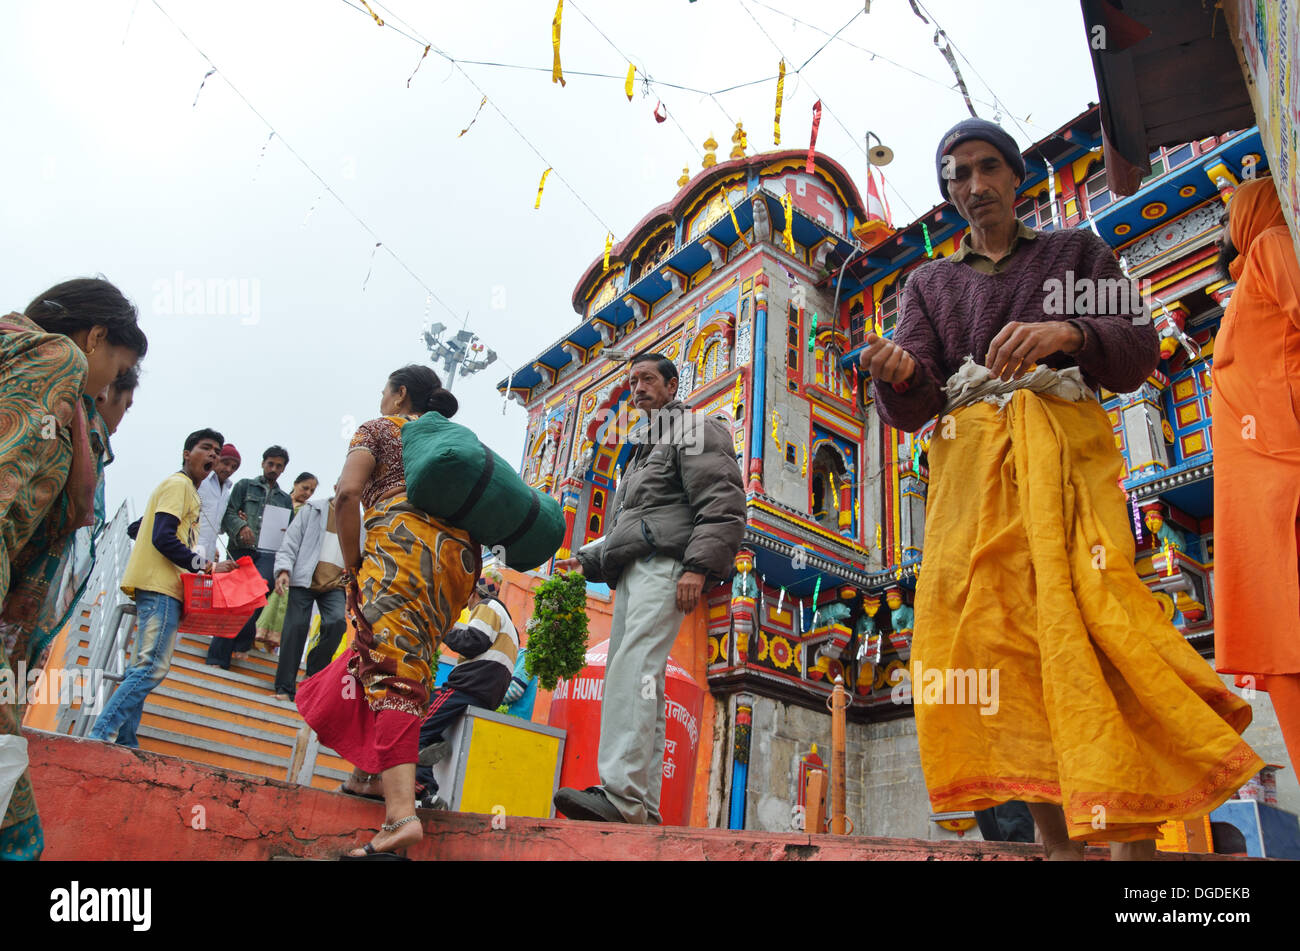 Badrinath temple in the Himalayas, India Stock Photo